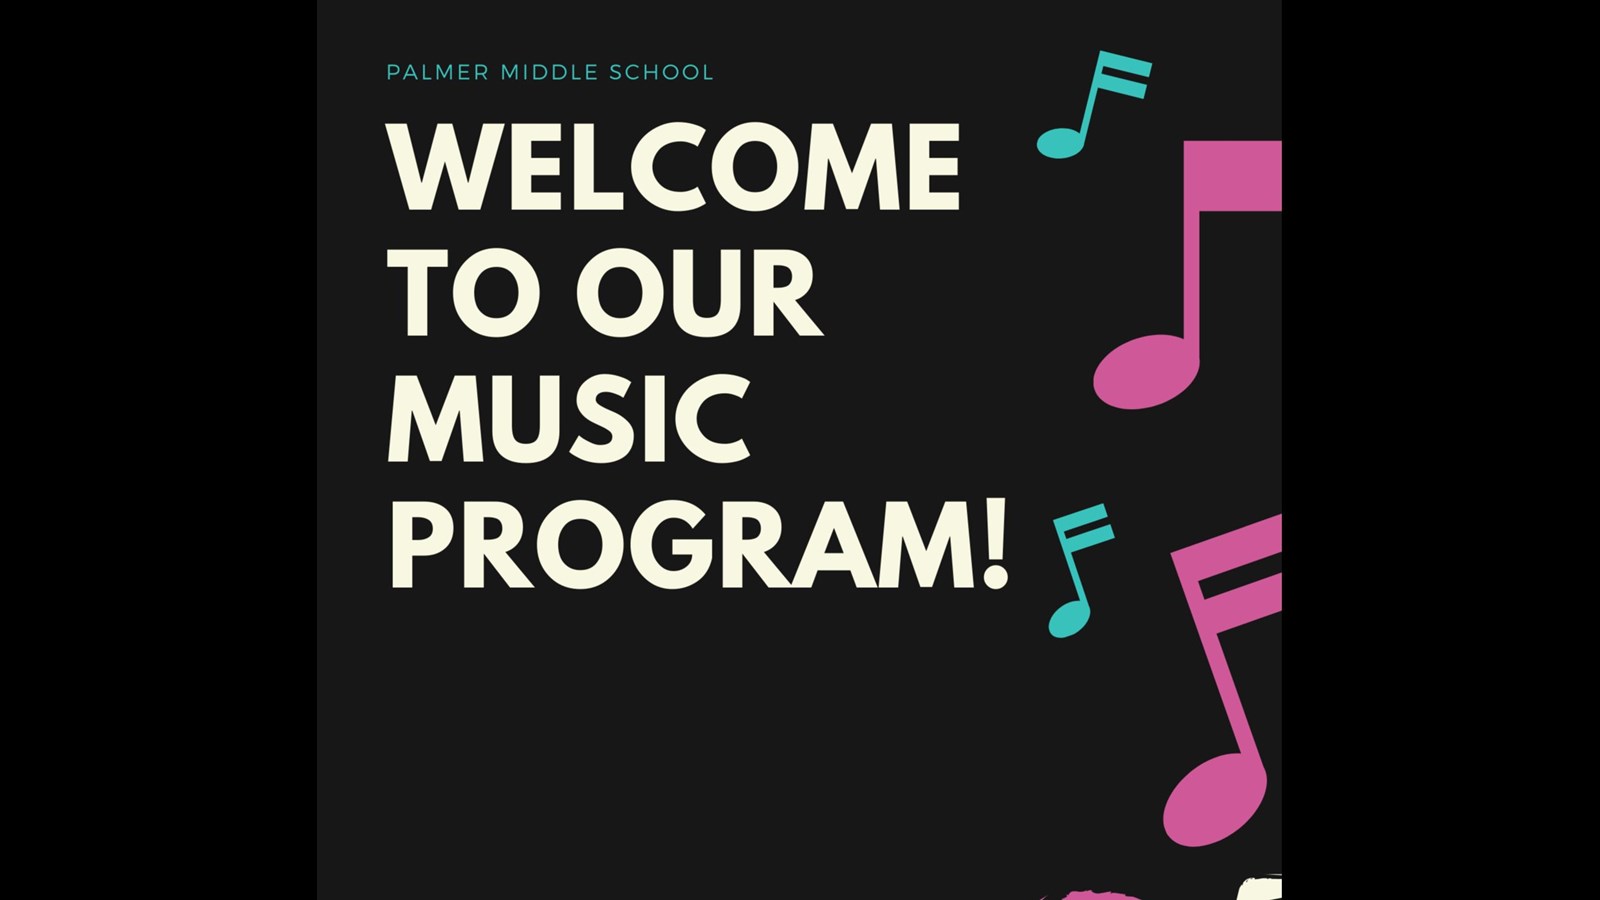 Welcome to our Music Program!